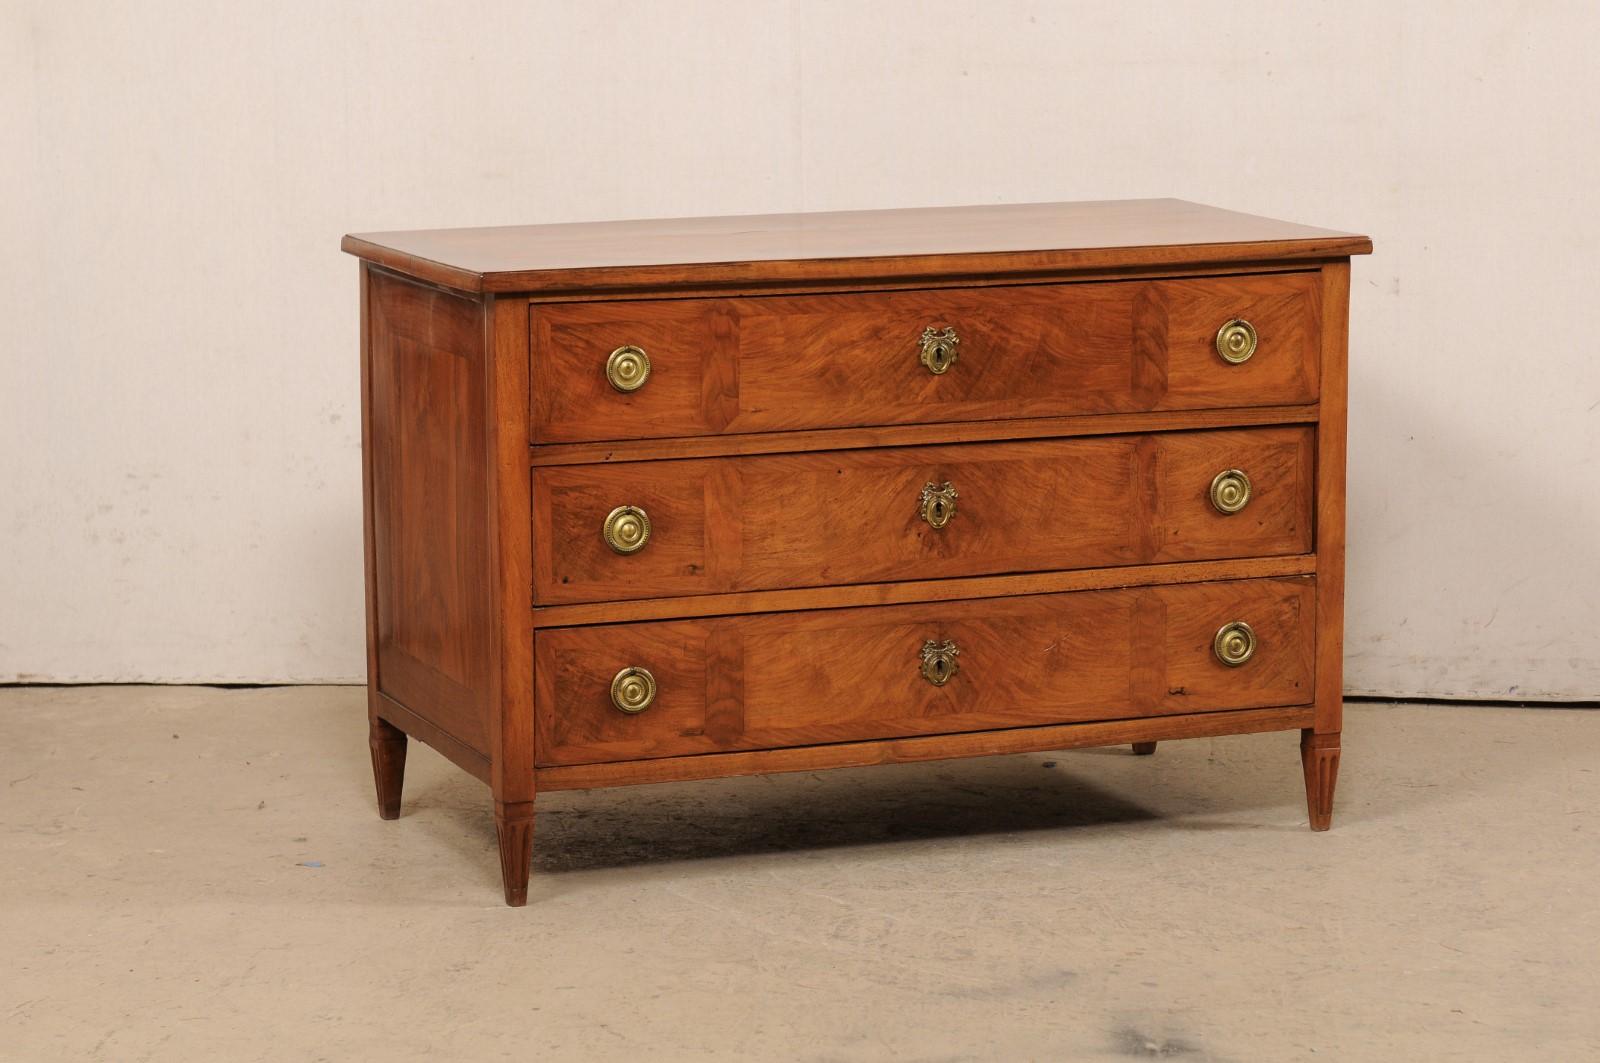 A French neoclassical commode, with lovely veneer inlays, from the early 19th century. This antique chest from France features a rectangular-shaped top with exquisite book-match veneer top over a case which houses three full-sized and graduated